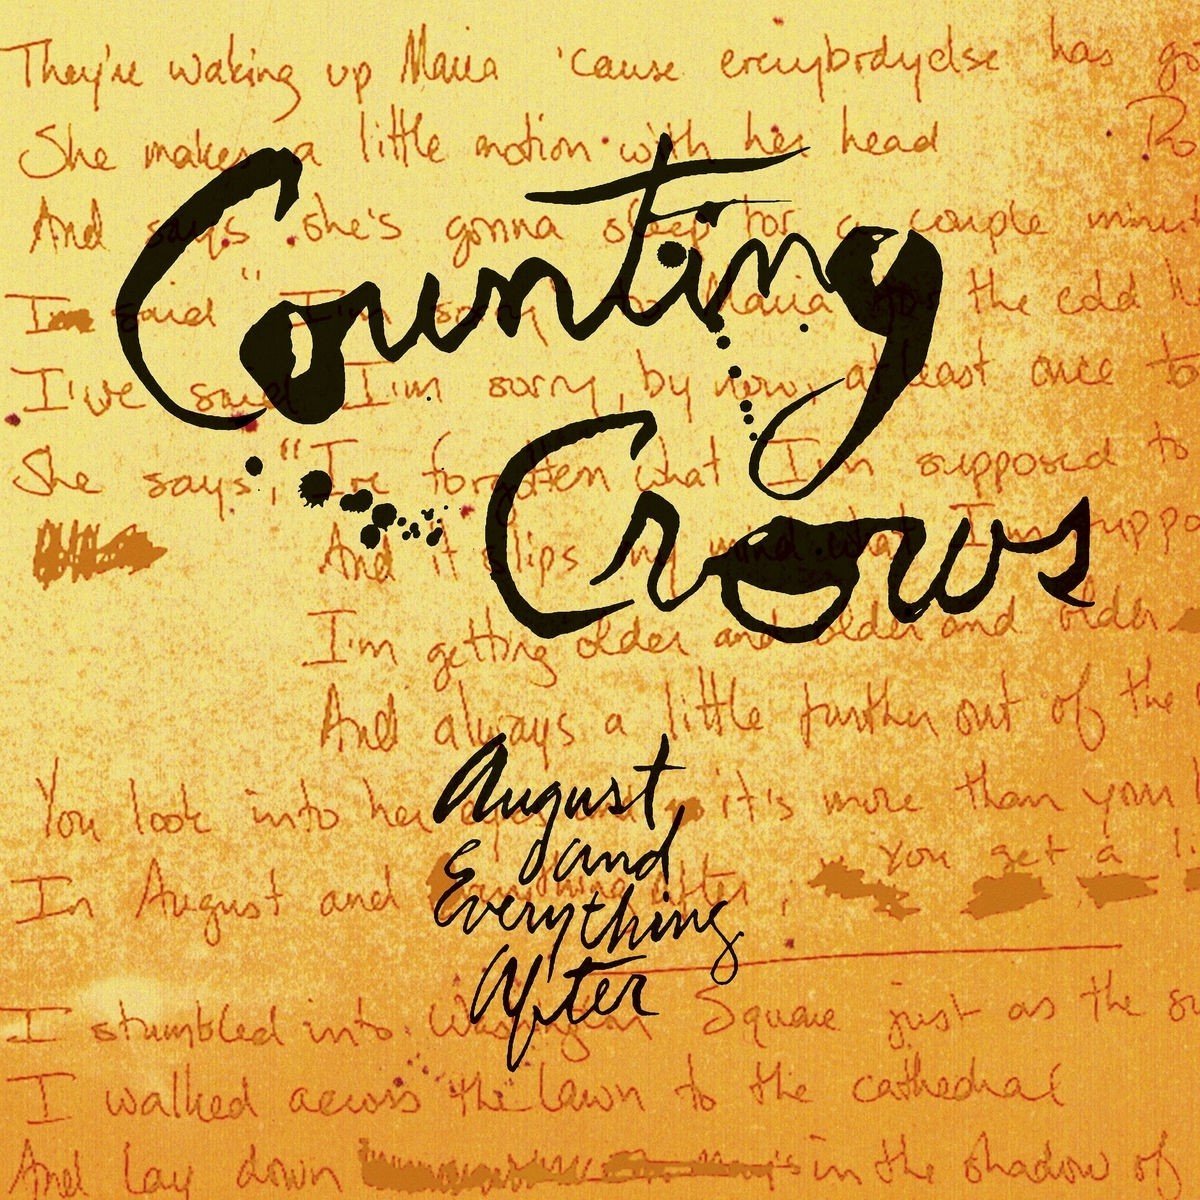 Counting Crows - August and Everything After (2 LP) - Counting Crows